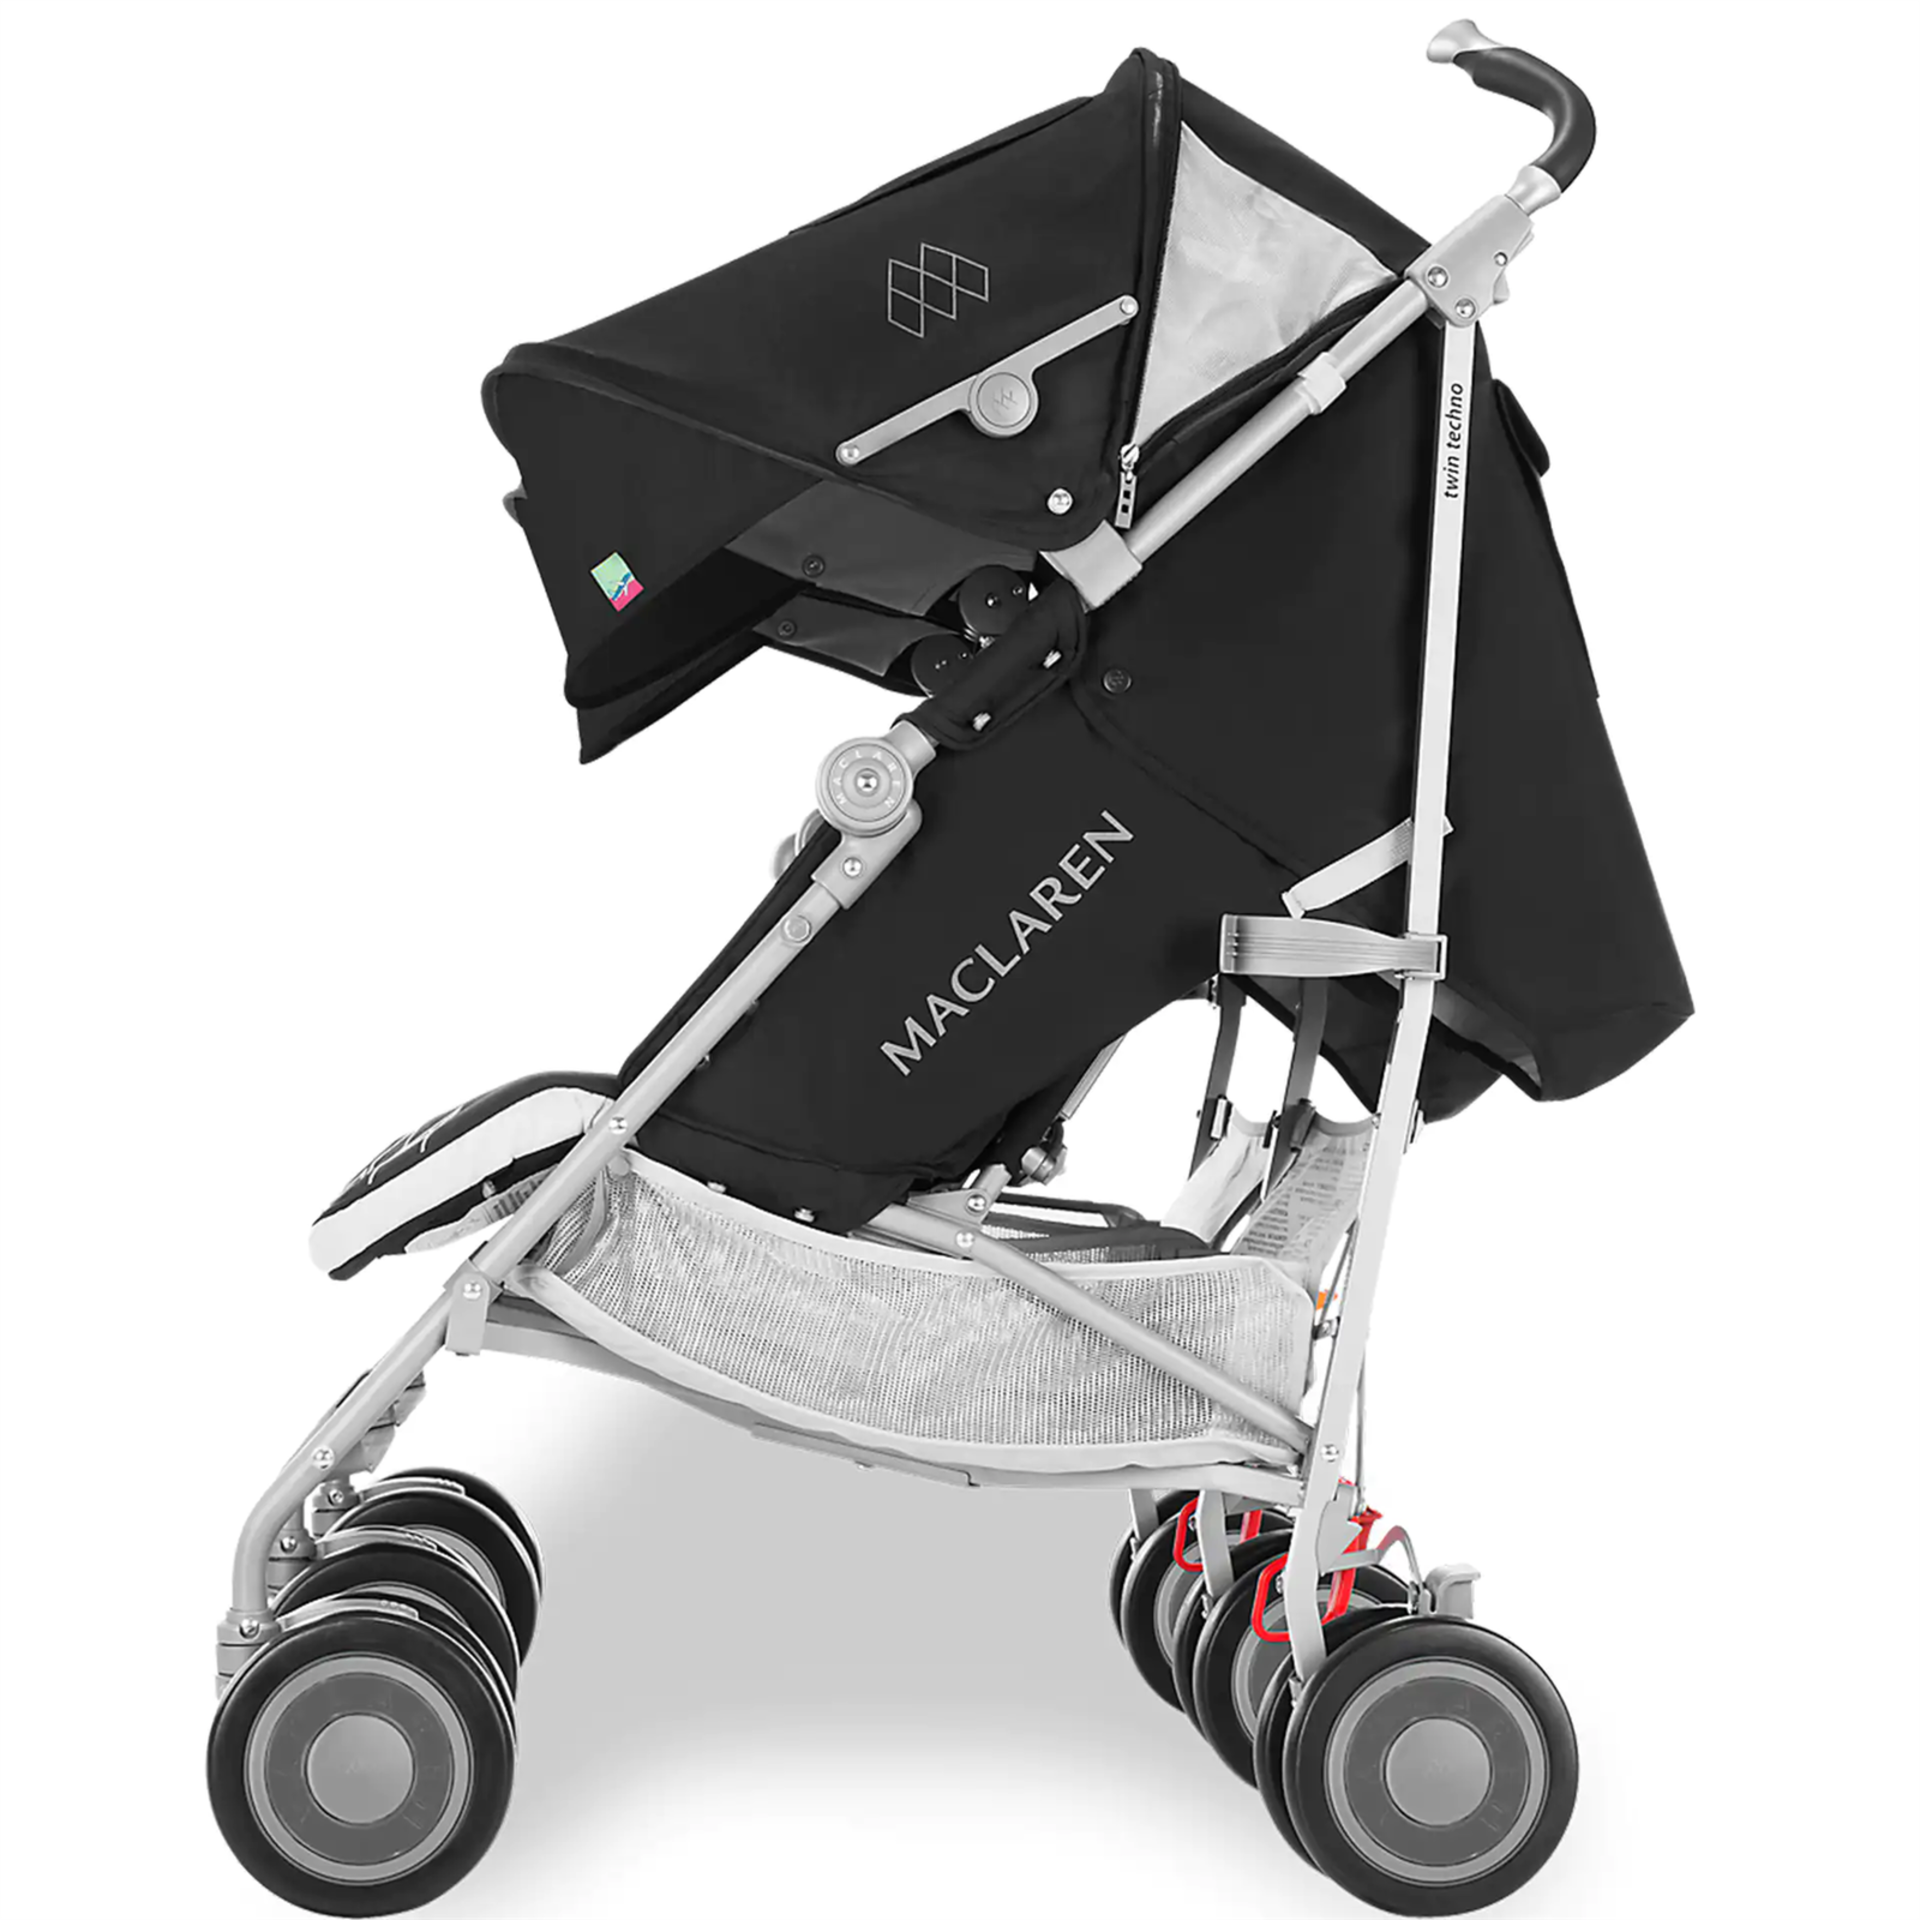 Maclaren Pushchair Twin Techno Black Built For Comfort/Performance For 2 - Image 5 of 7